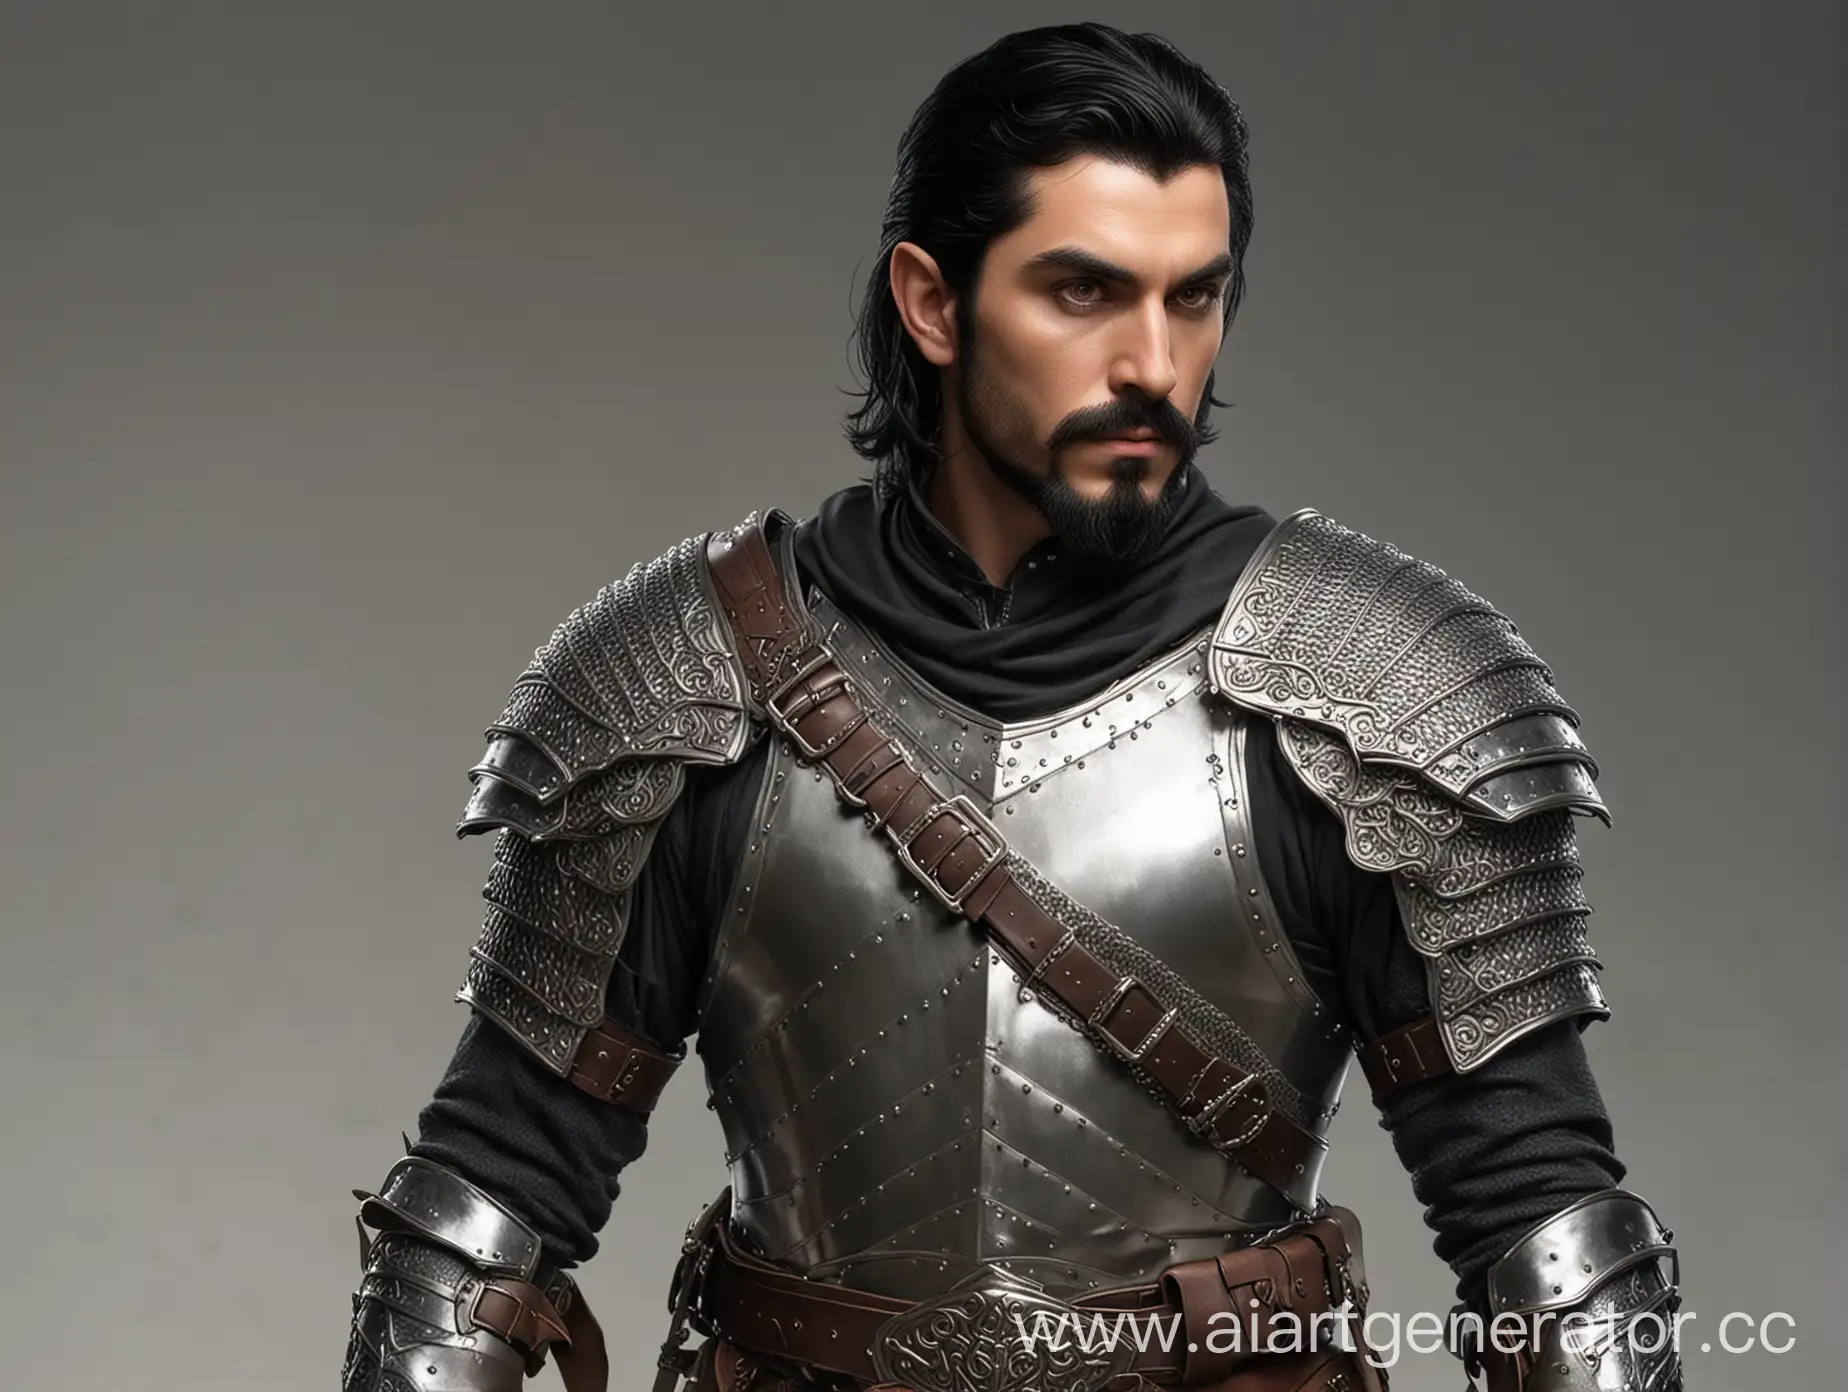 HalfElf-Warrior-in-Latin-Armor-with-Leather-Gloves-and-Swords